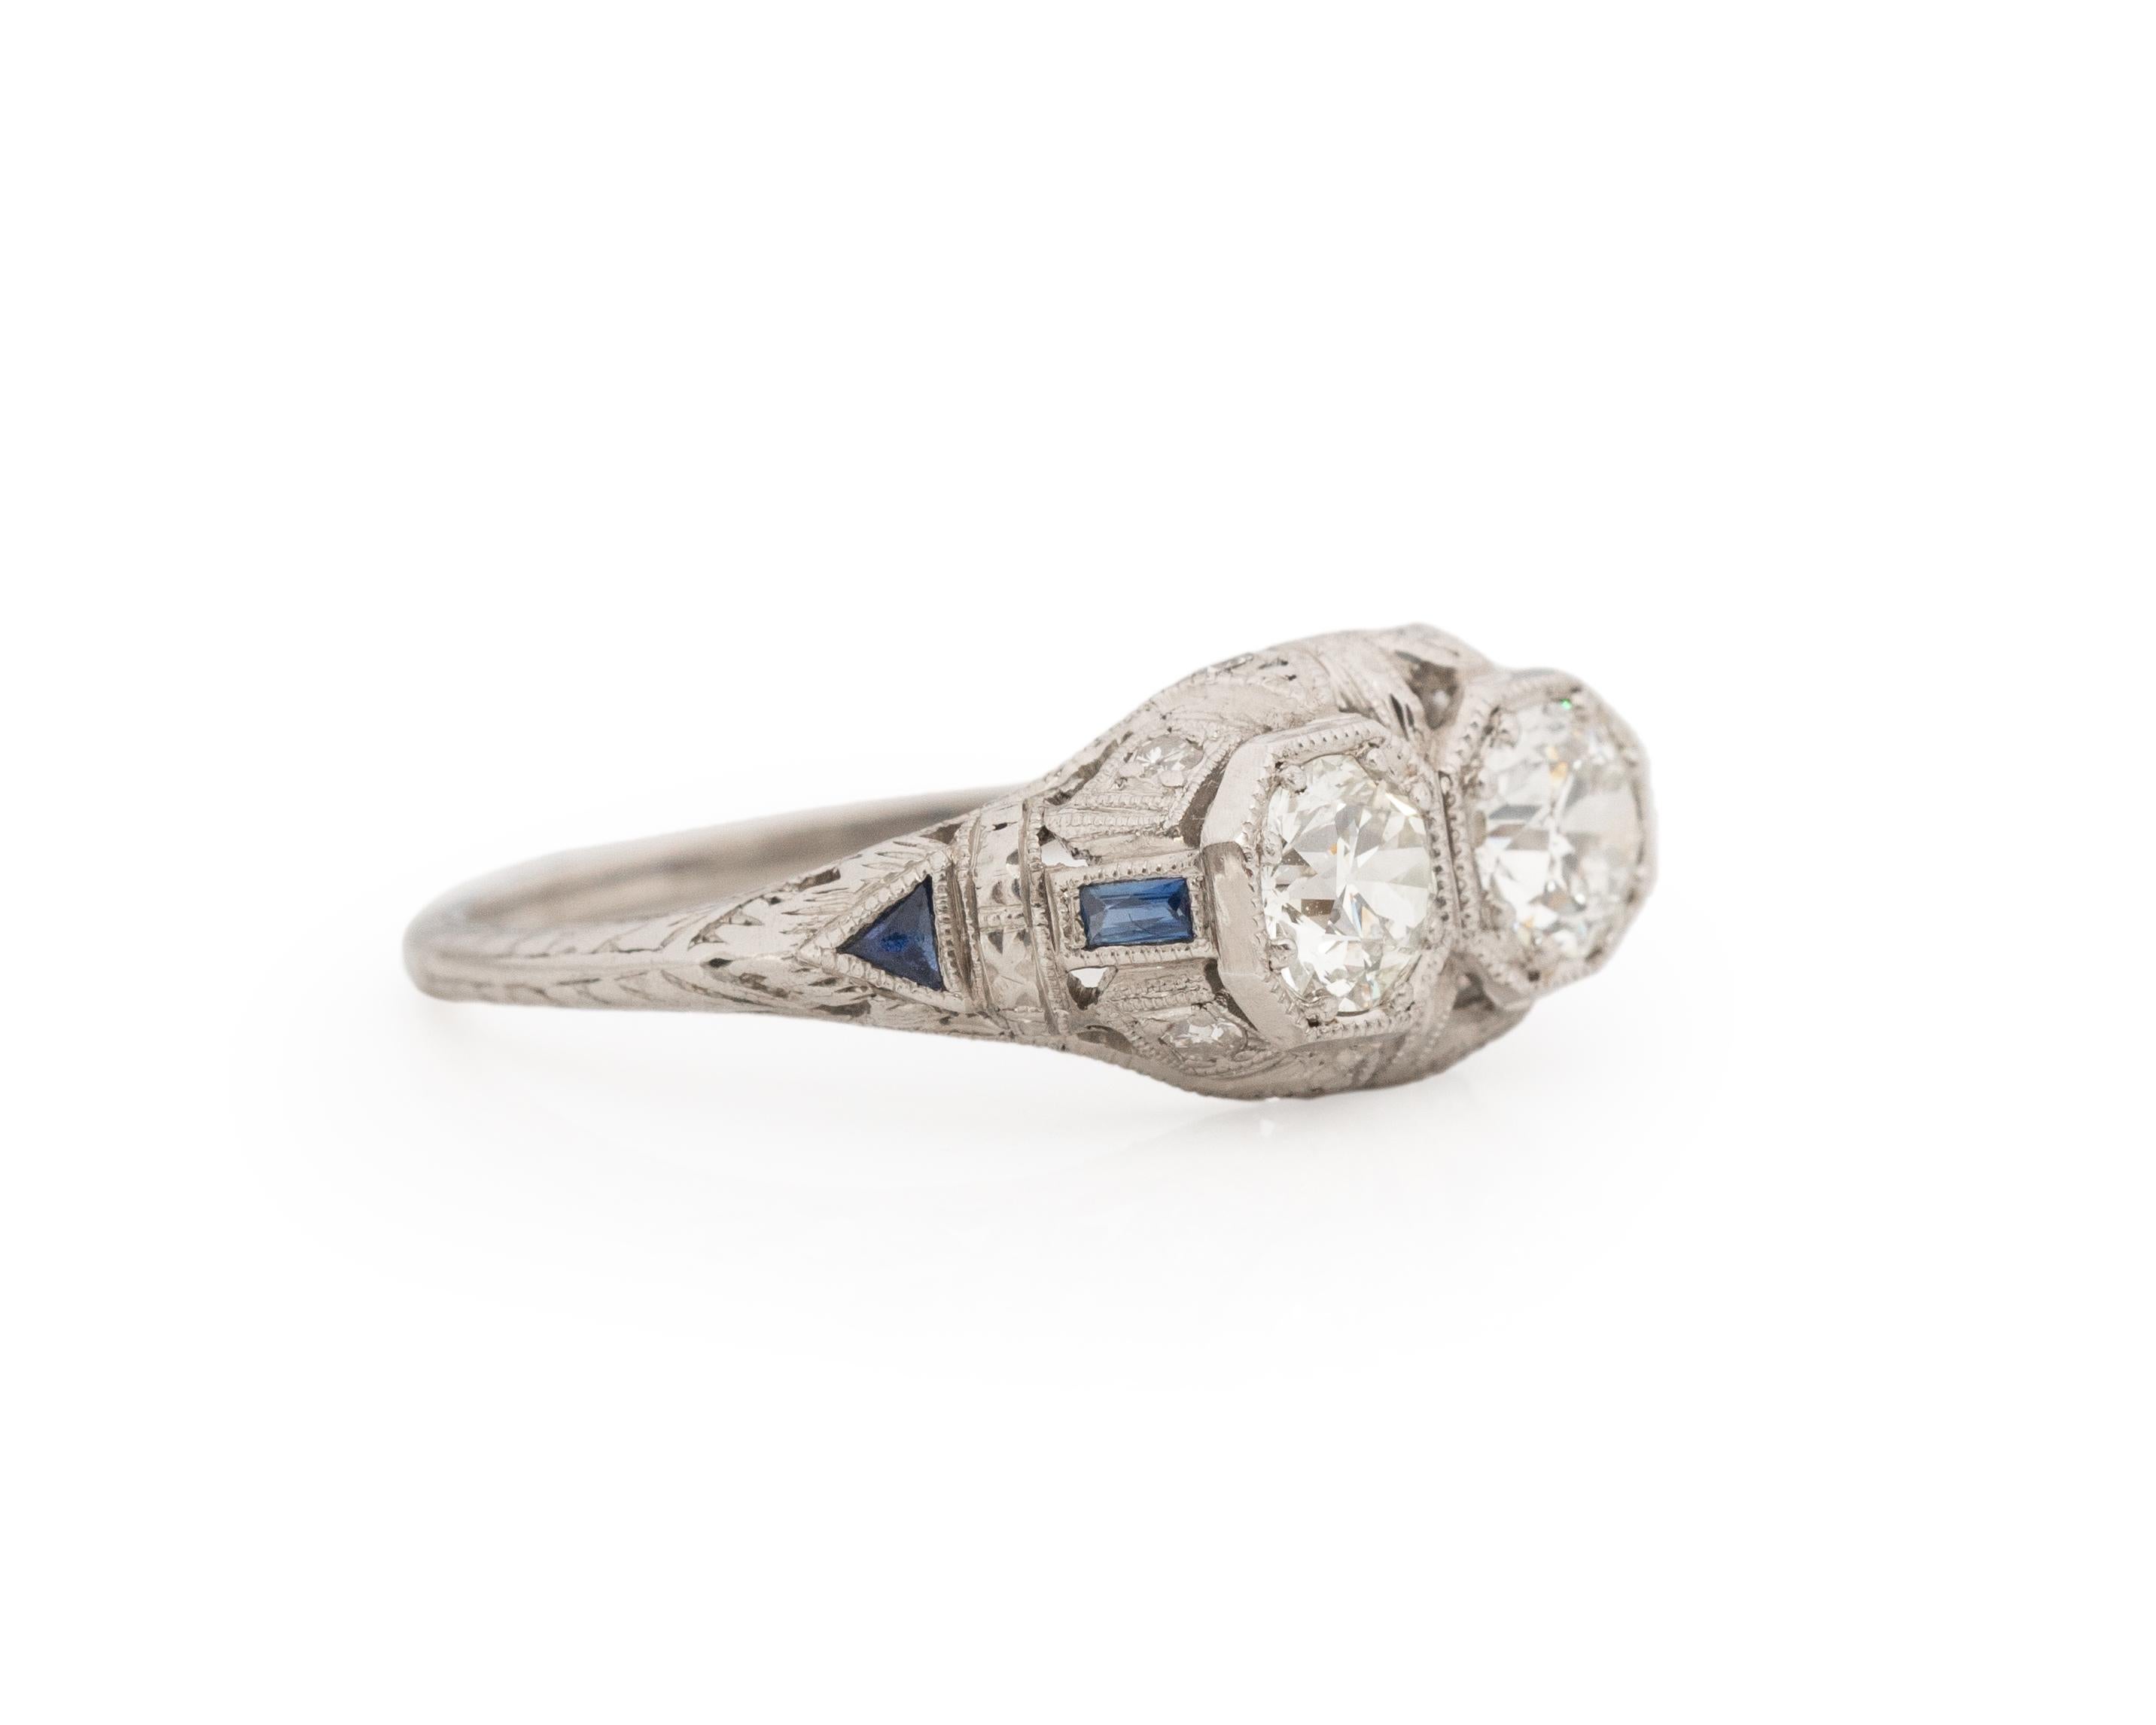 Ring Size: 8
Metal Type: Platinum [Hallmarked, and Tested]
Weight: 3.3 grams

Diamond Details:
Weight: .90ct total weight
Cut: Old European brilliant
Color: I/J
Clarity: VS
Type: Natural

Finger to Top of Stone Measurement: 4.5mm
Shank/Band Width: